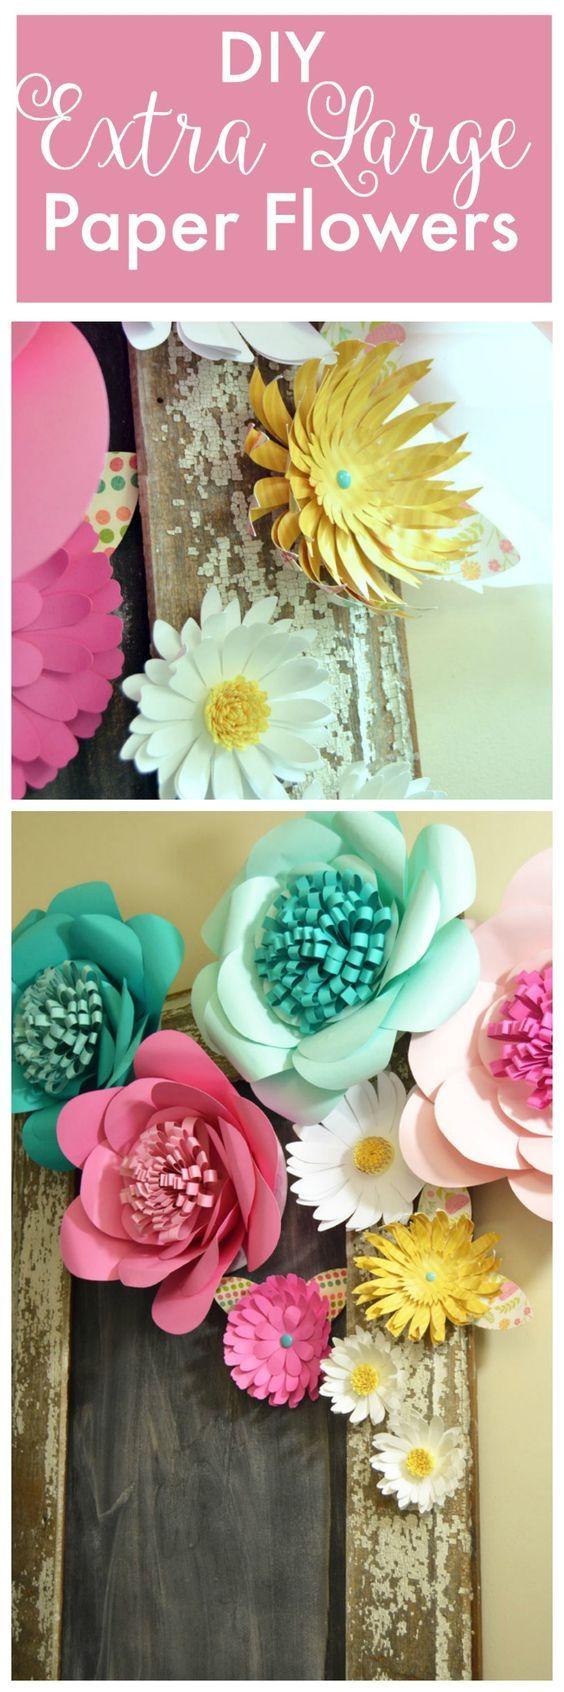 Wedding - How To Make Huge Paper Flowers